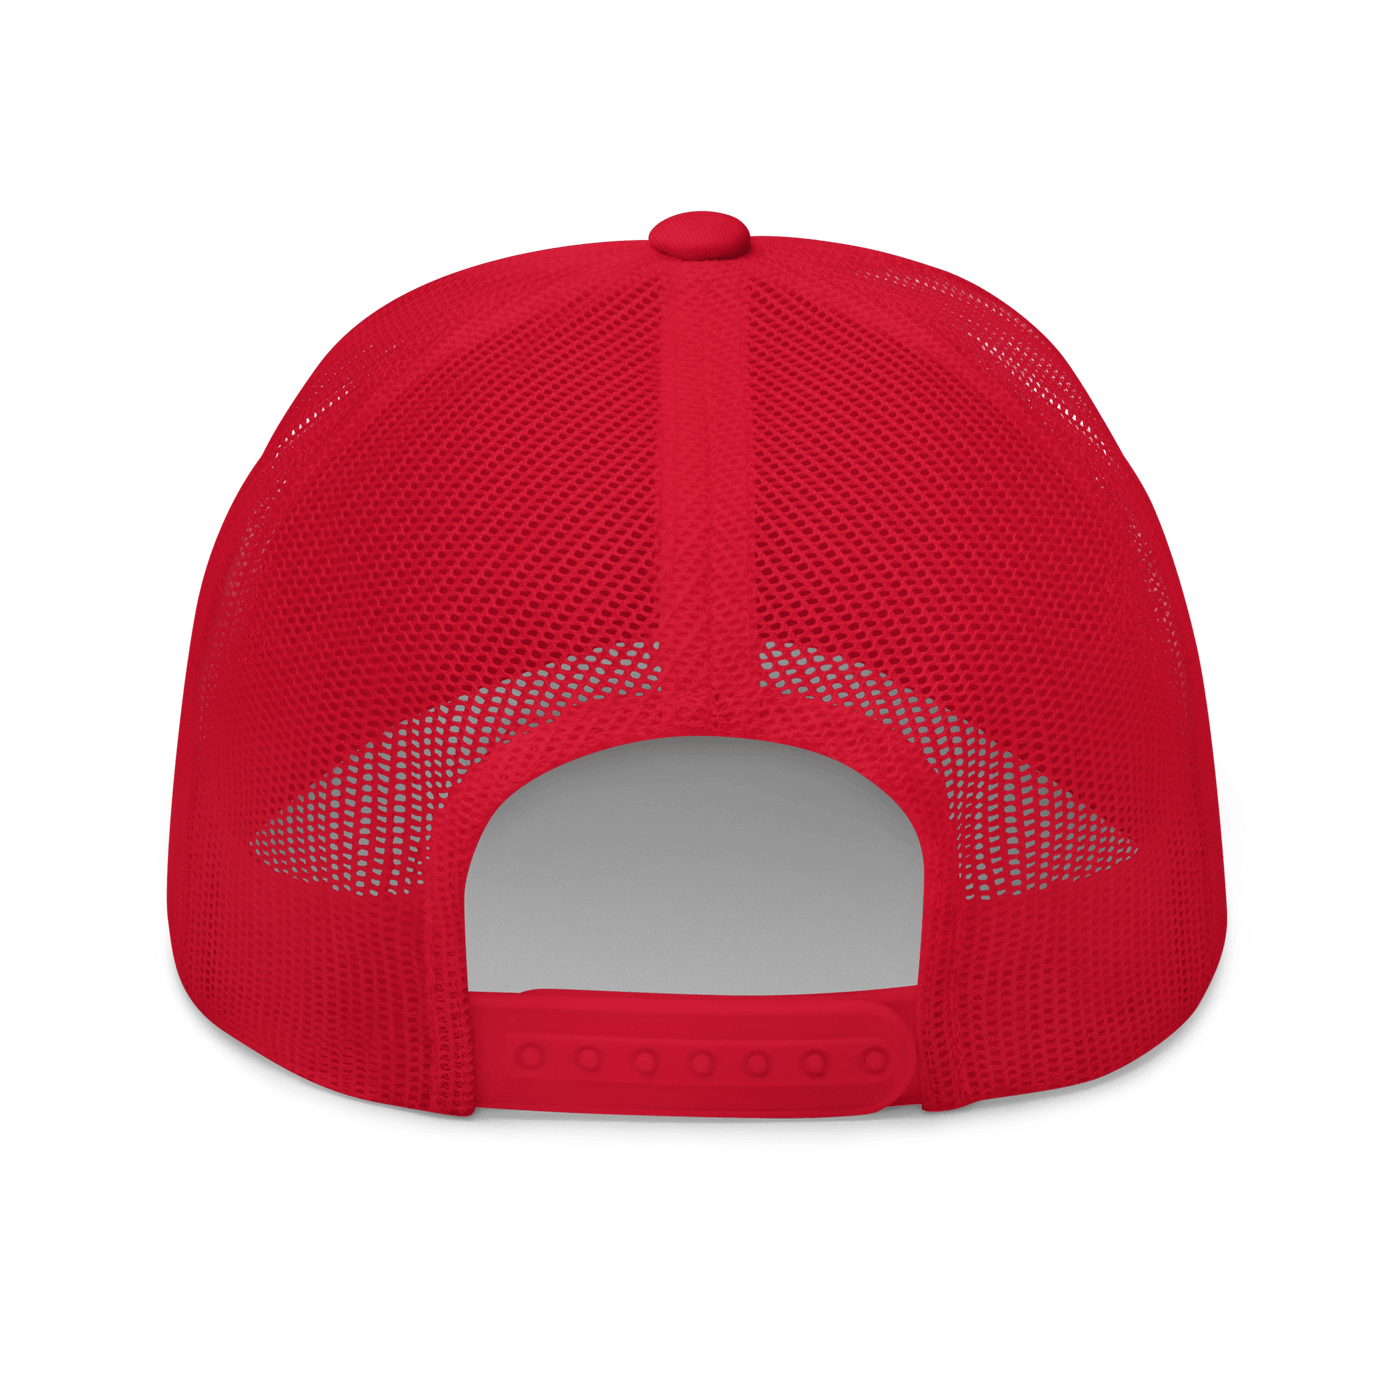 FAKE Trucker Cap - Red - - Just Another Cap Store